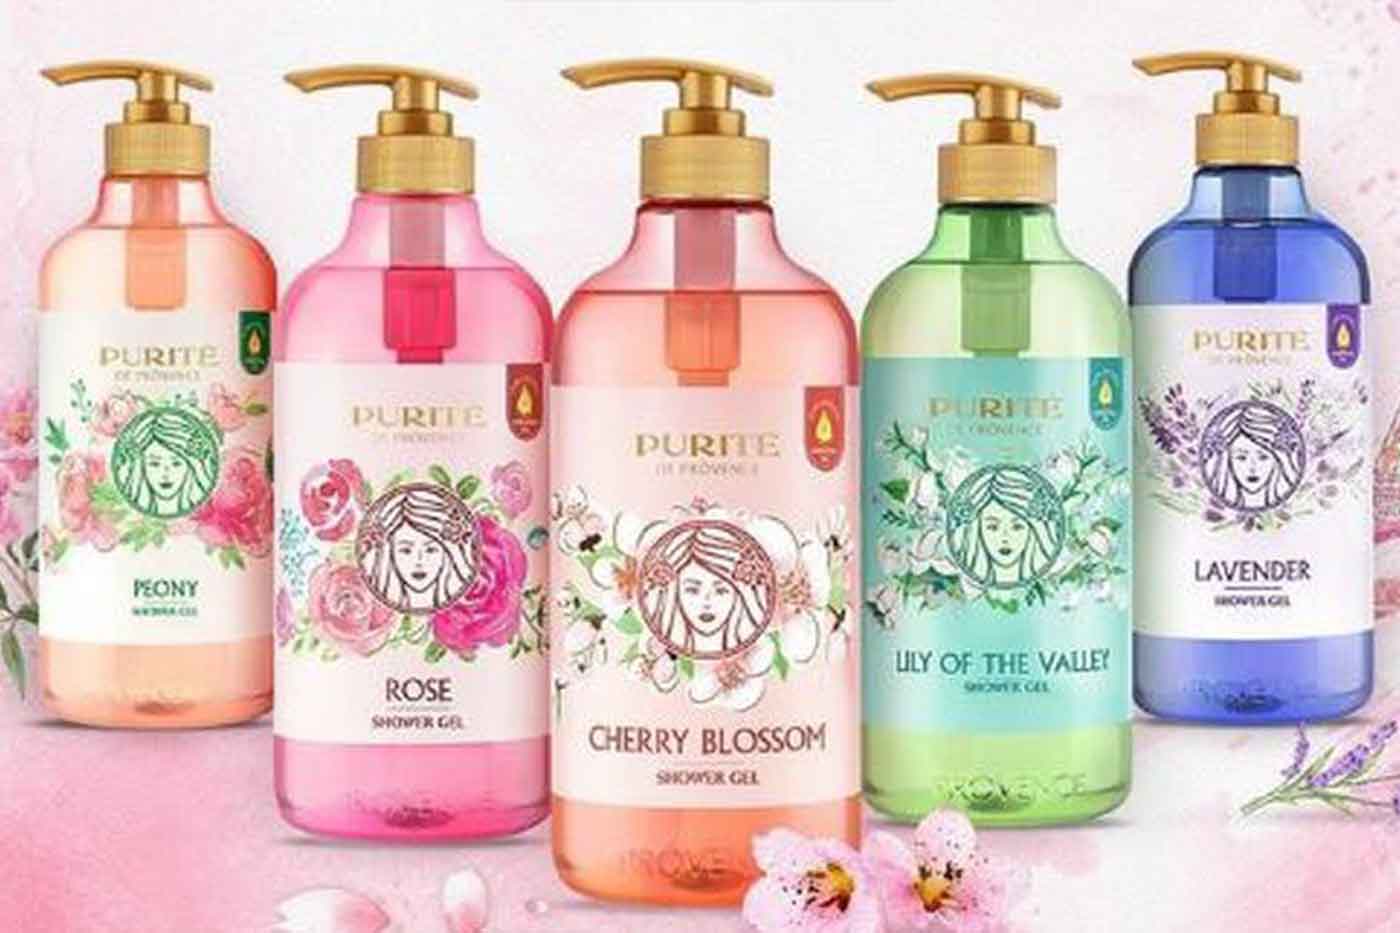 Marico to acquire Vietnam-based female personal care firm Beauty X